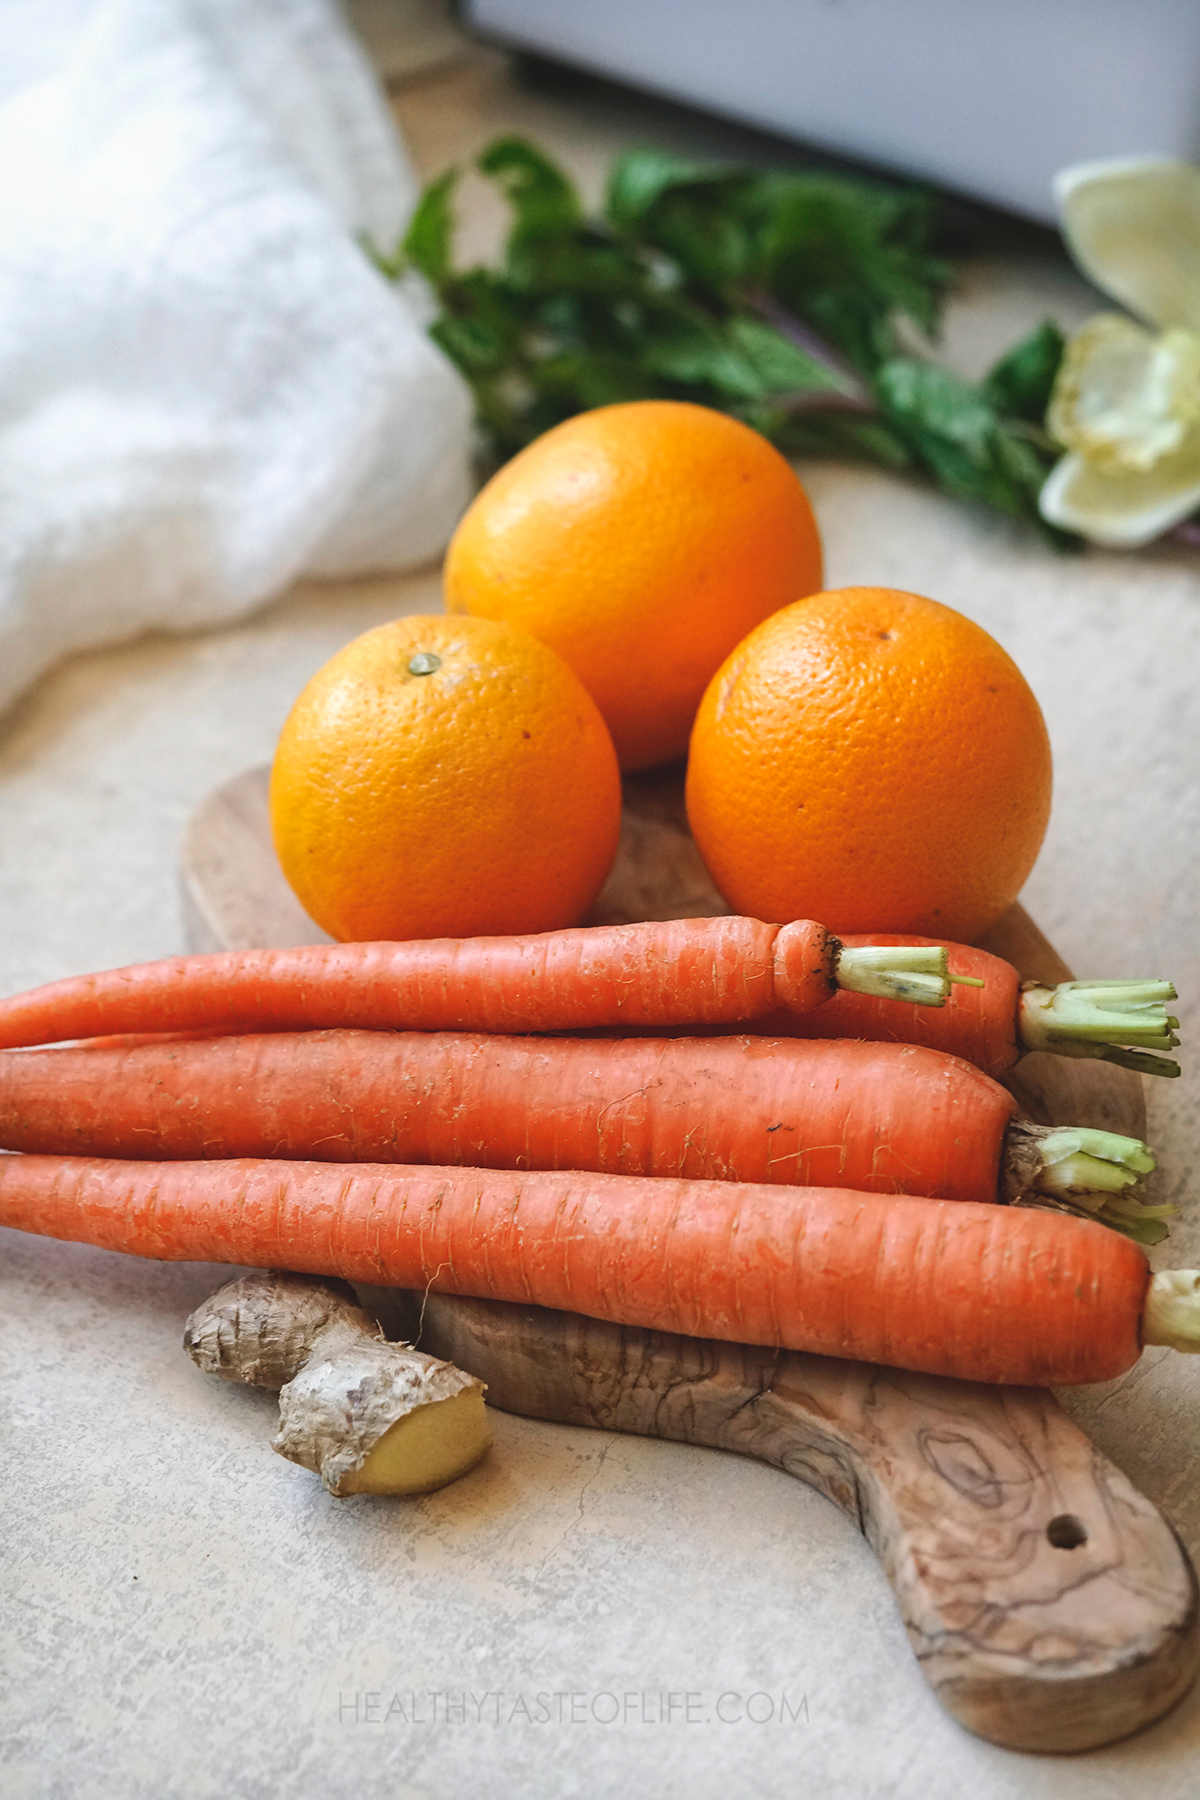 Ingredients for this immunity juice recipe: carrots oranges and ginger.